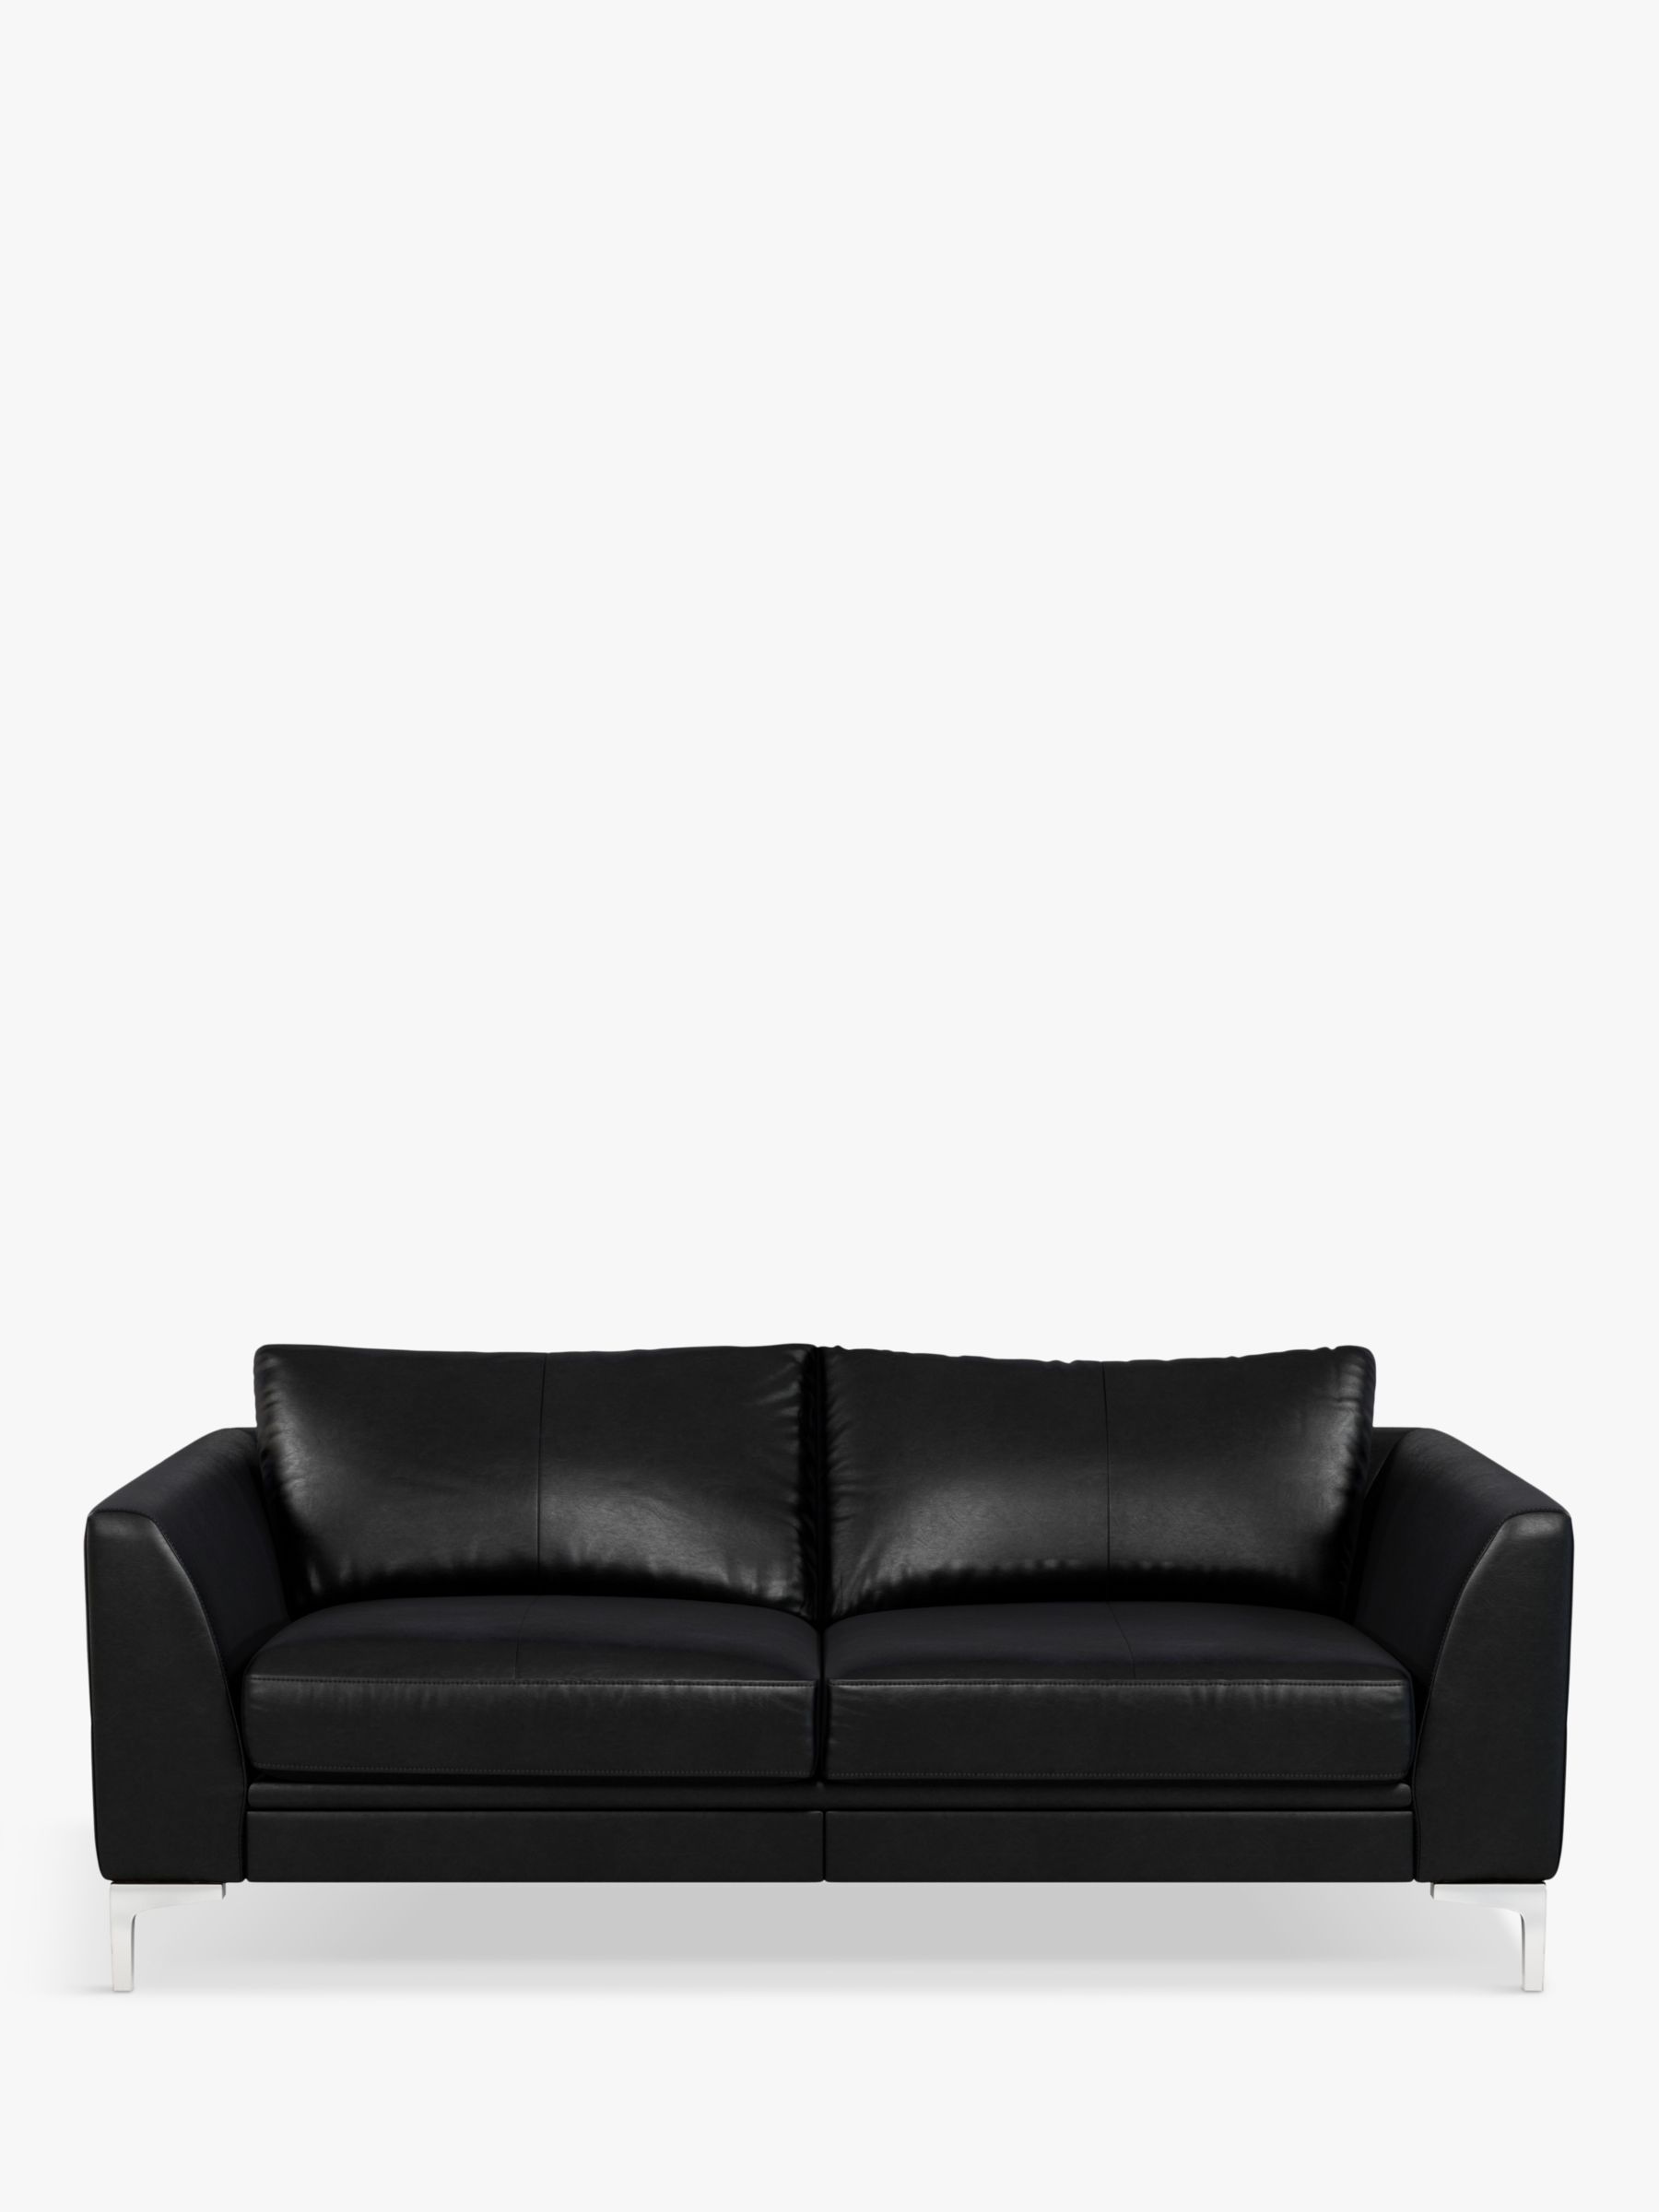 Photo of John lewis belgrave motion large 3 seater leather sofa with footrest mechanism metal leg